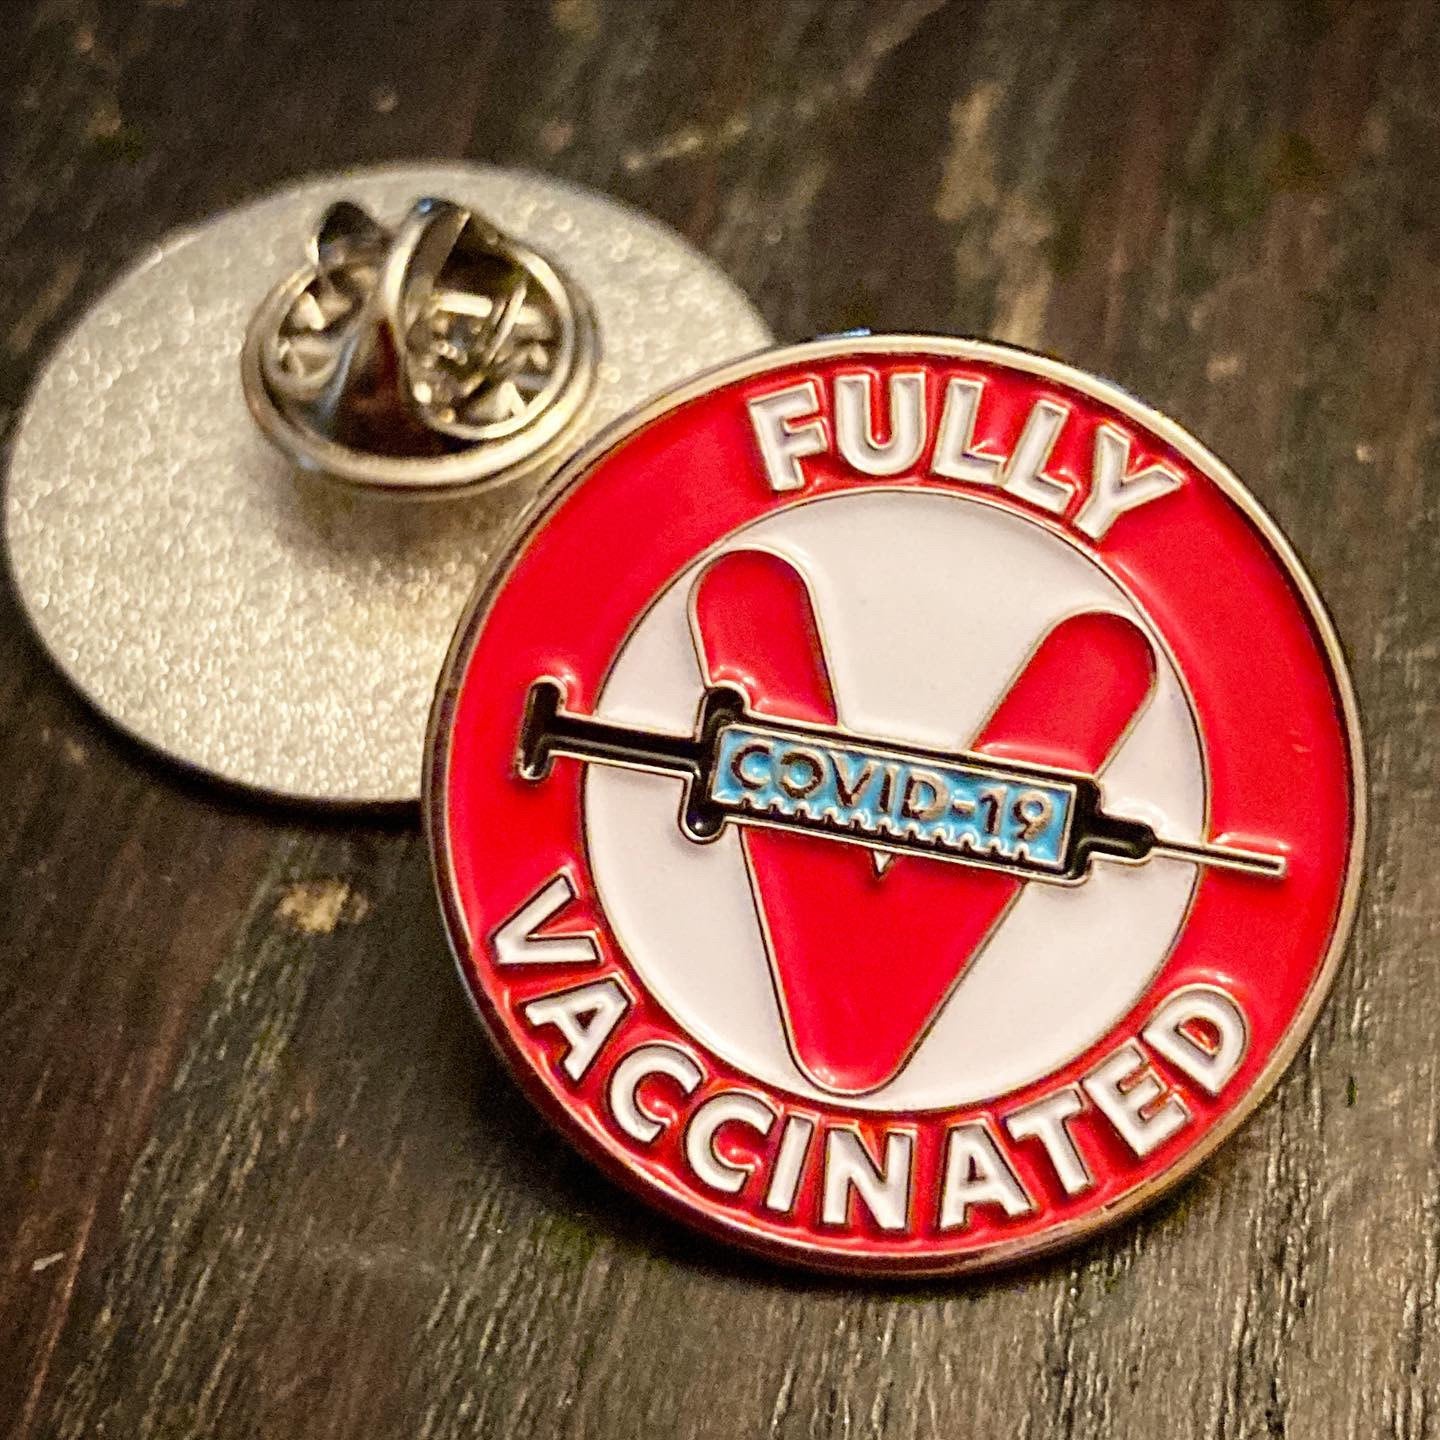 A metal pin that says “Fully vaccinated” and has a syringe that reads “Covid-19.”